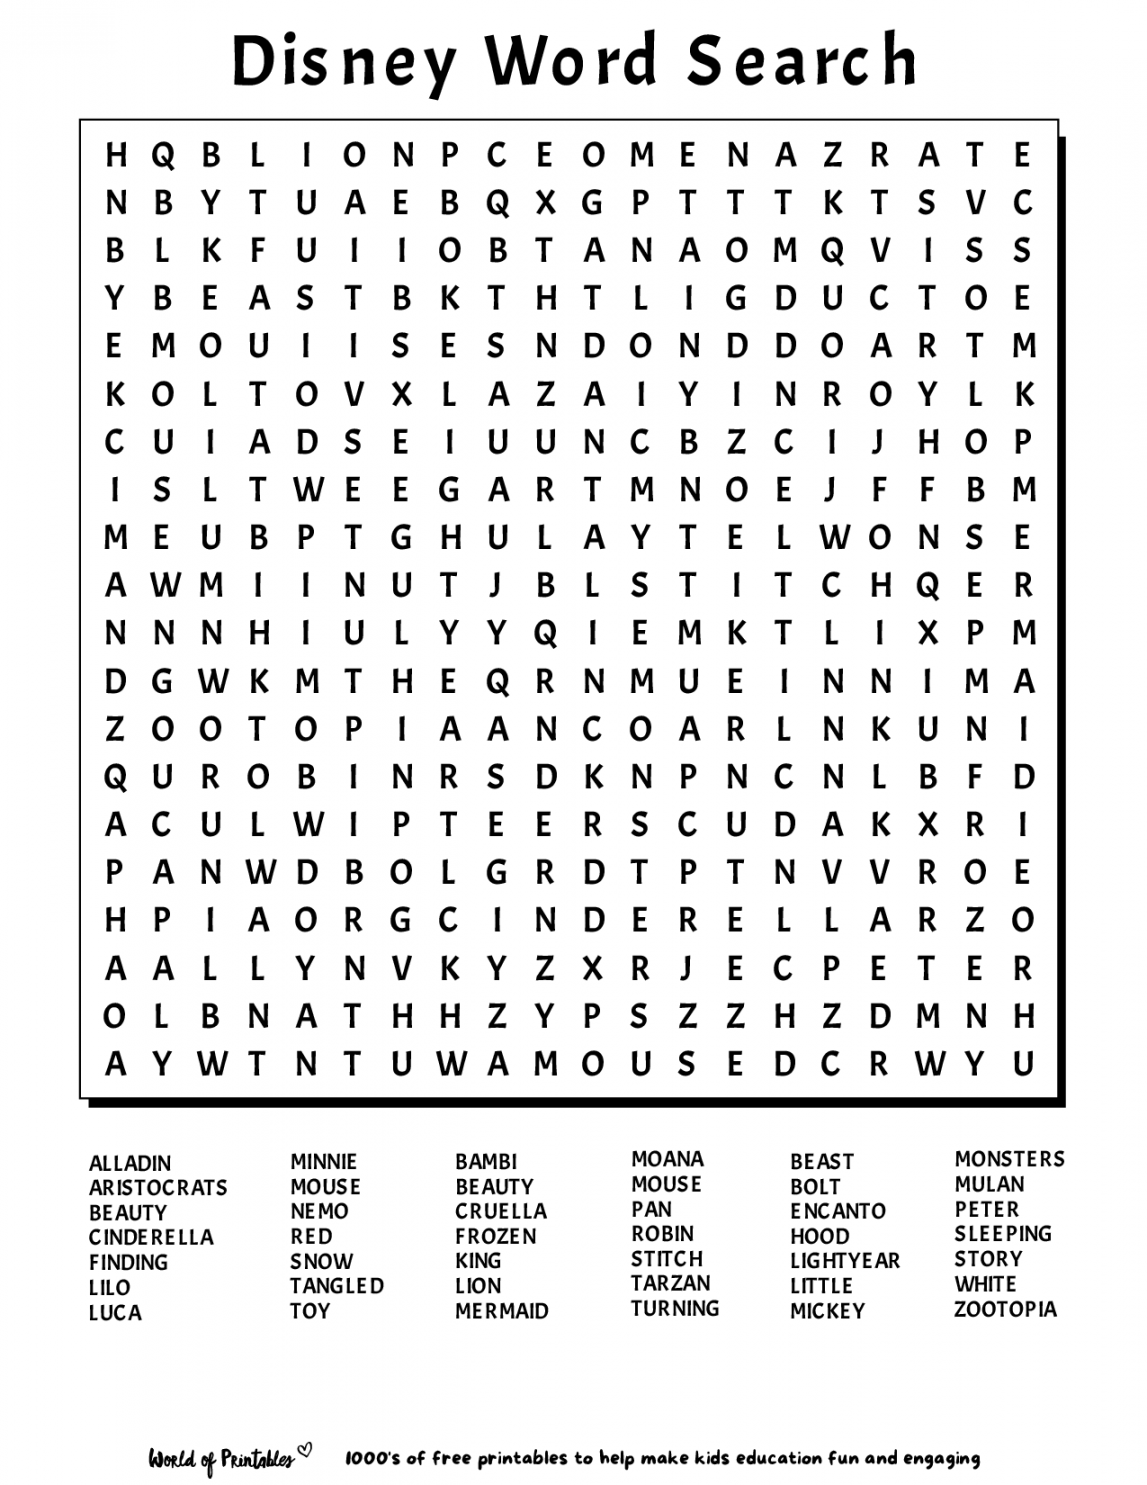 Word Search Free Printable - Printable - Printable Word Search  World of Printables